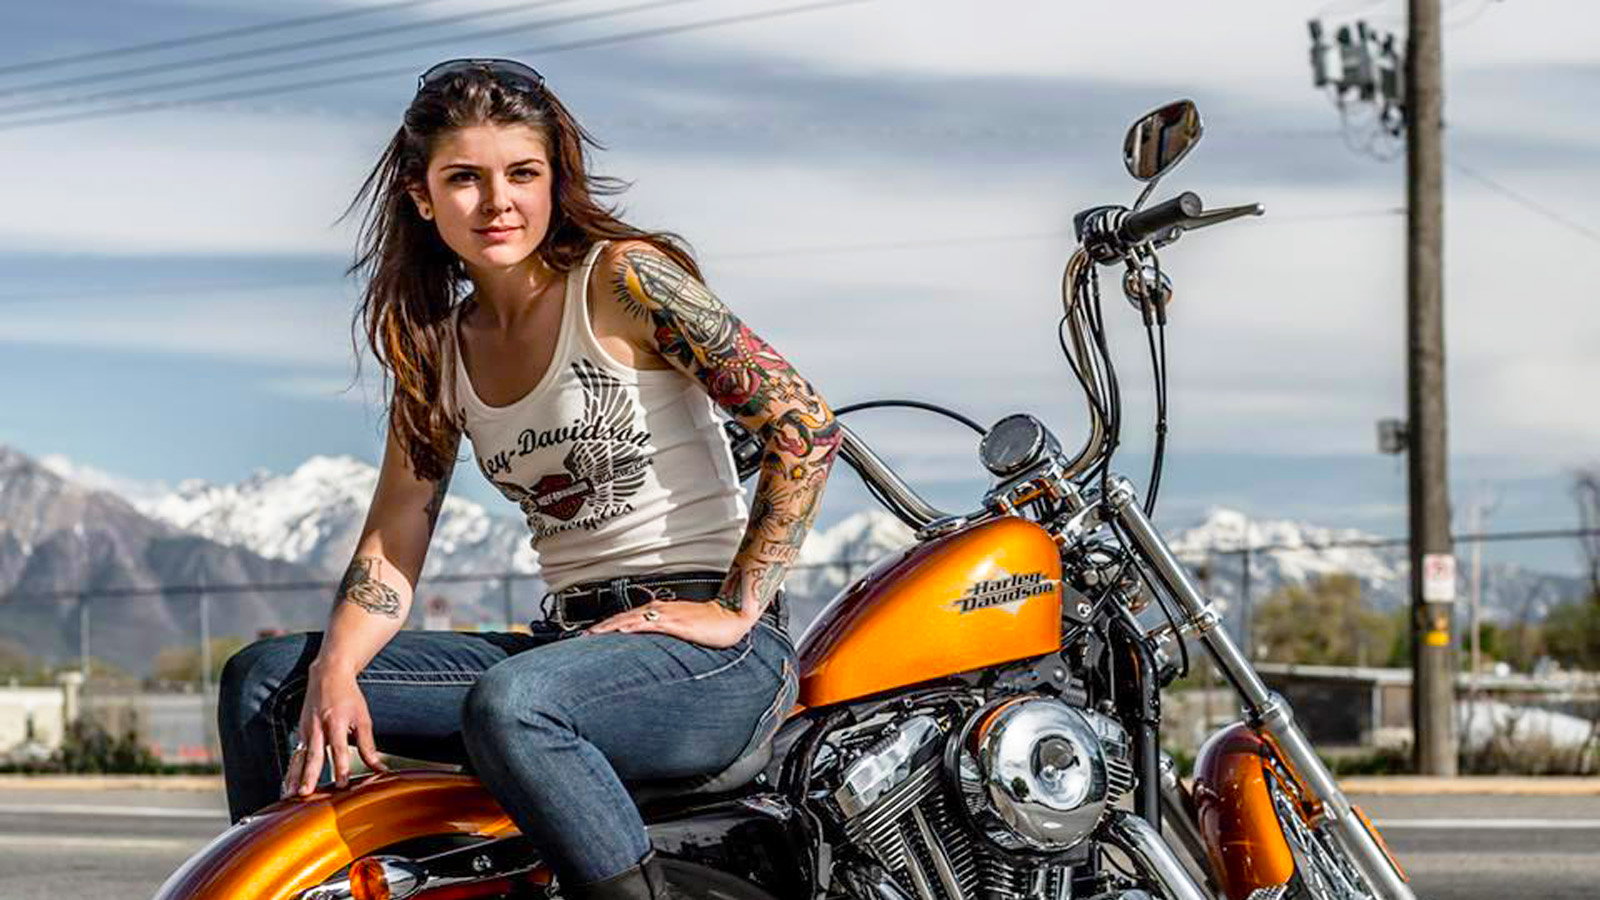 Pretty in Chrome - How Women Are Changing The Biker Image | Hdforums